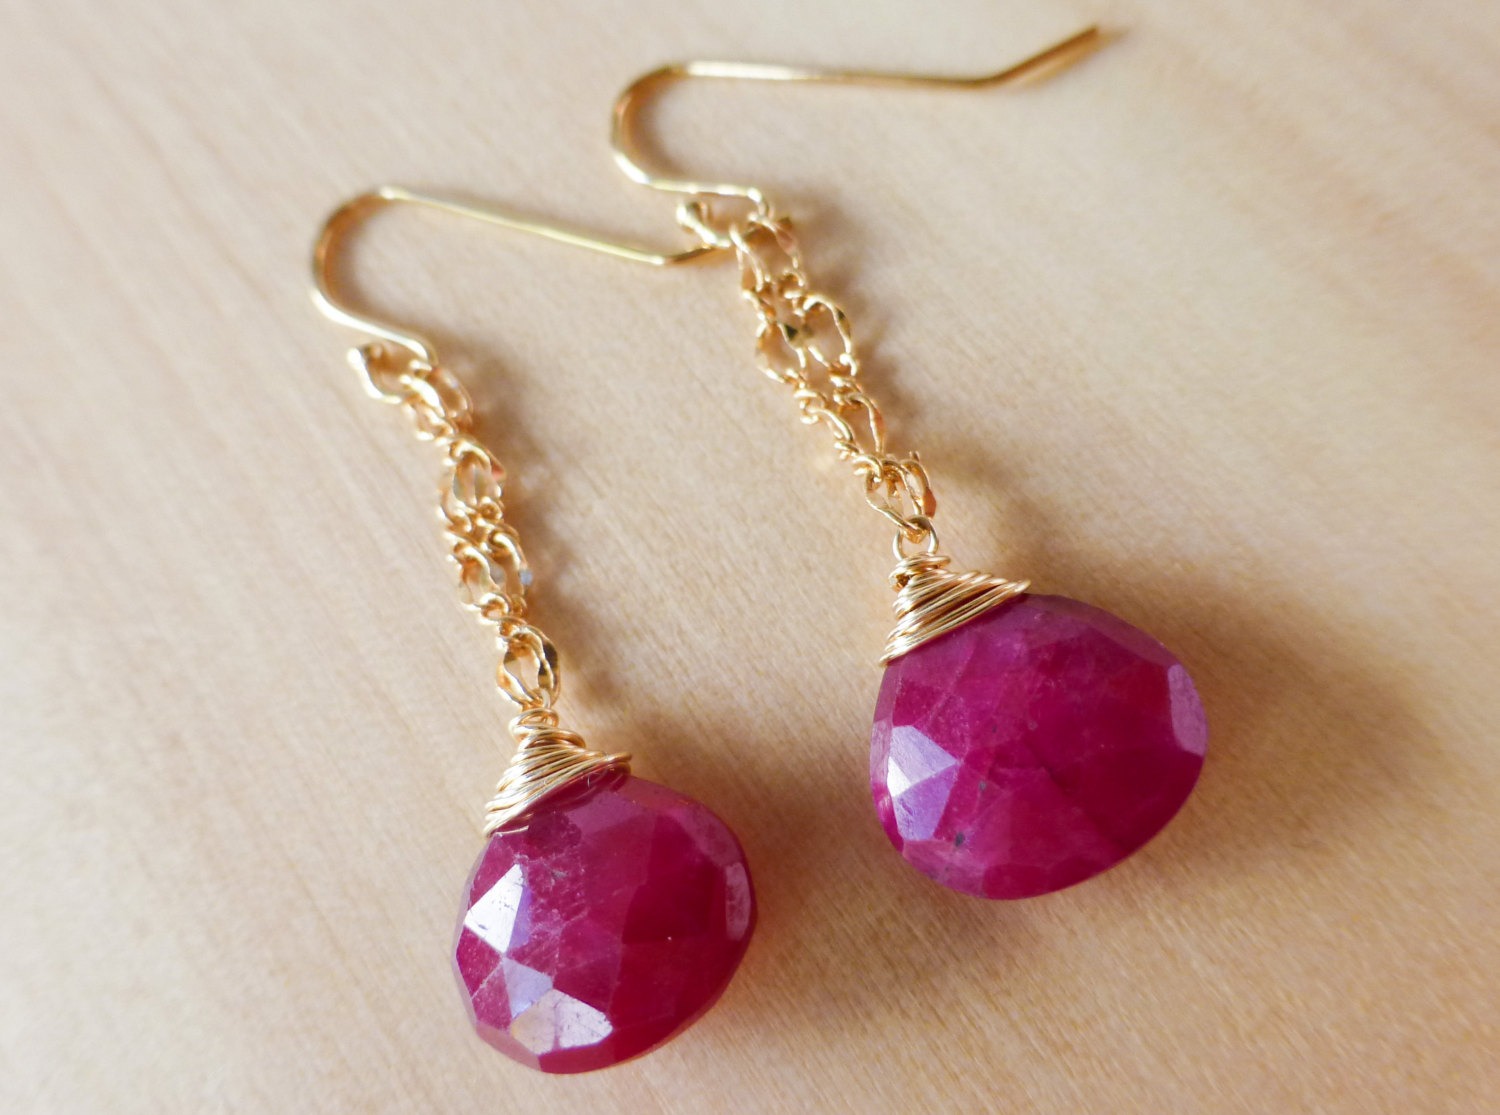 The Pink Red Ruby Dangle Earrings in Gold Filled - Valltasy